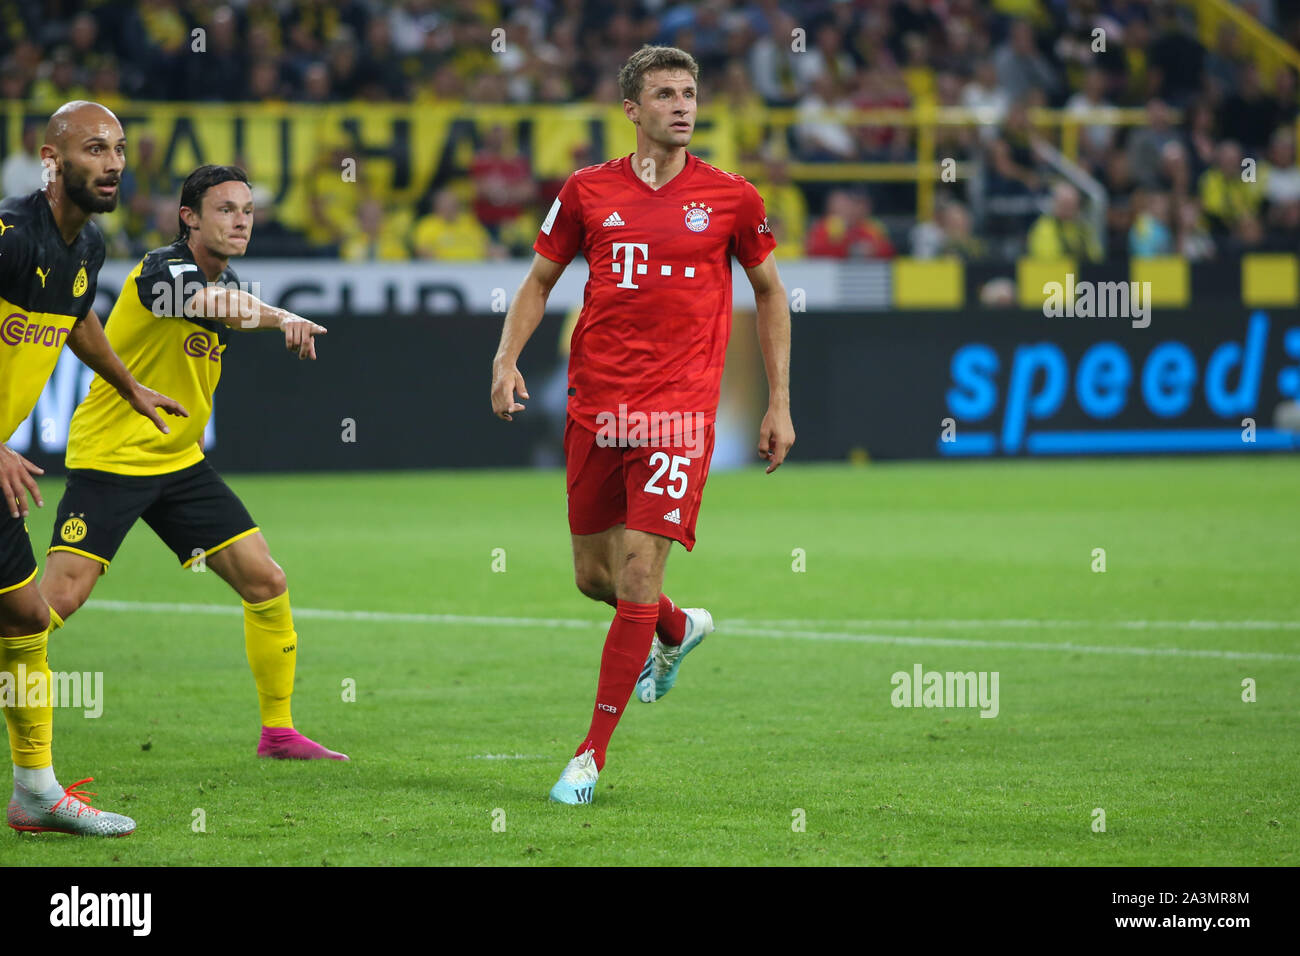 DORTMUND, GERMANY - AUGUST 03, 2019: Thomas Muller (Bayern Munchen) pictured during the final of the 2019/20 german supercup. Stock Photo